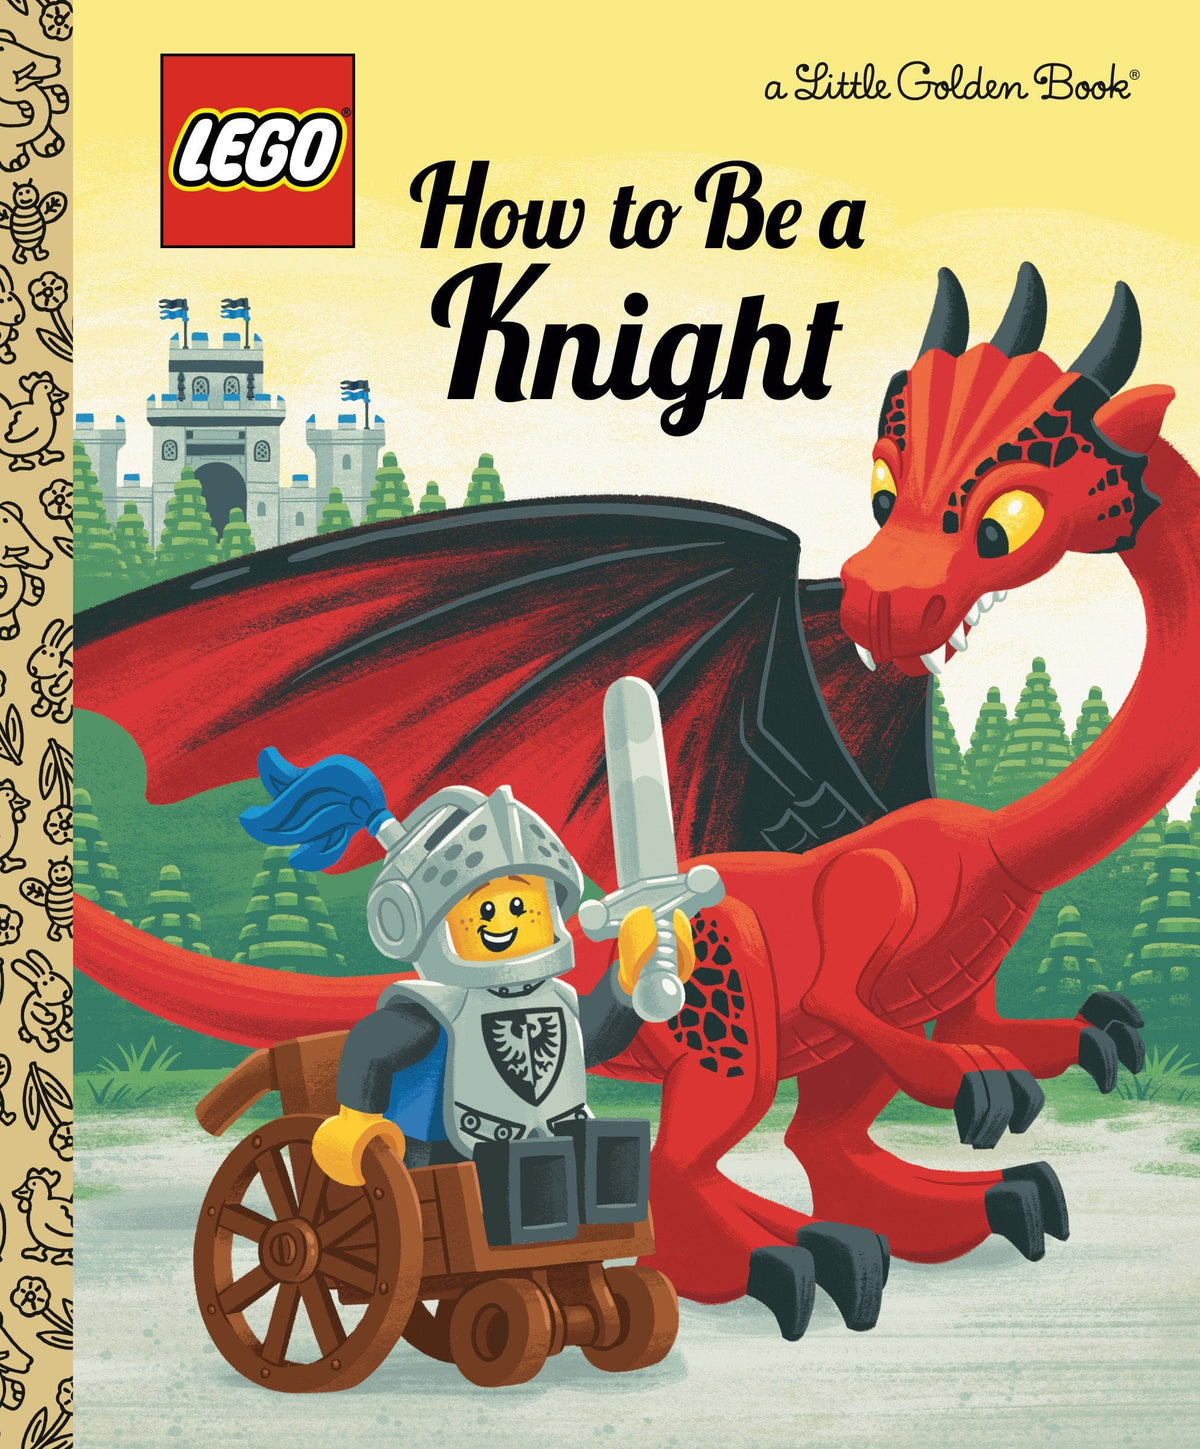 Little Golden Book: Lego - How To Be A Knight - Third Eye